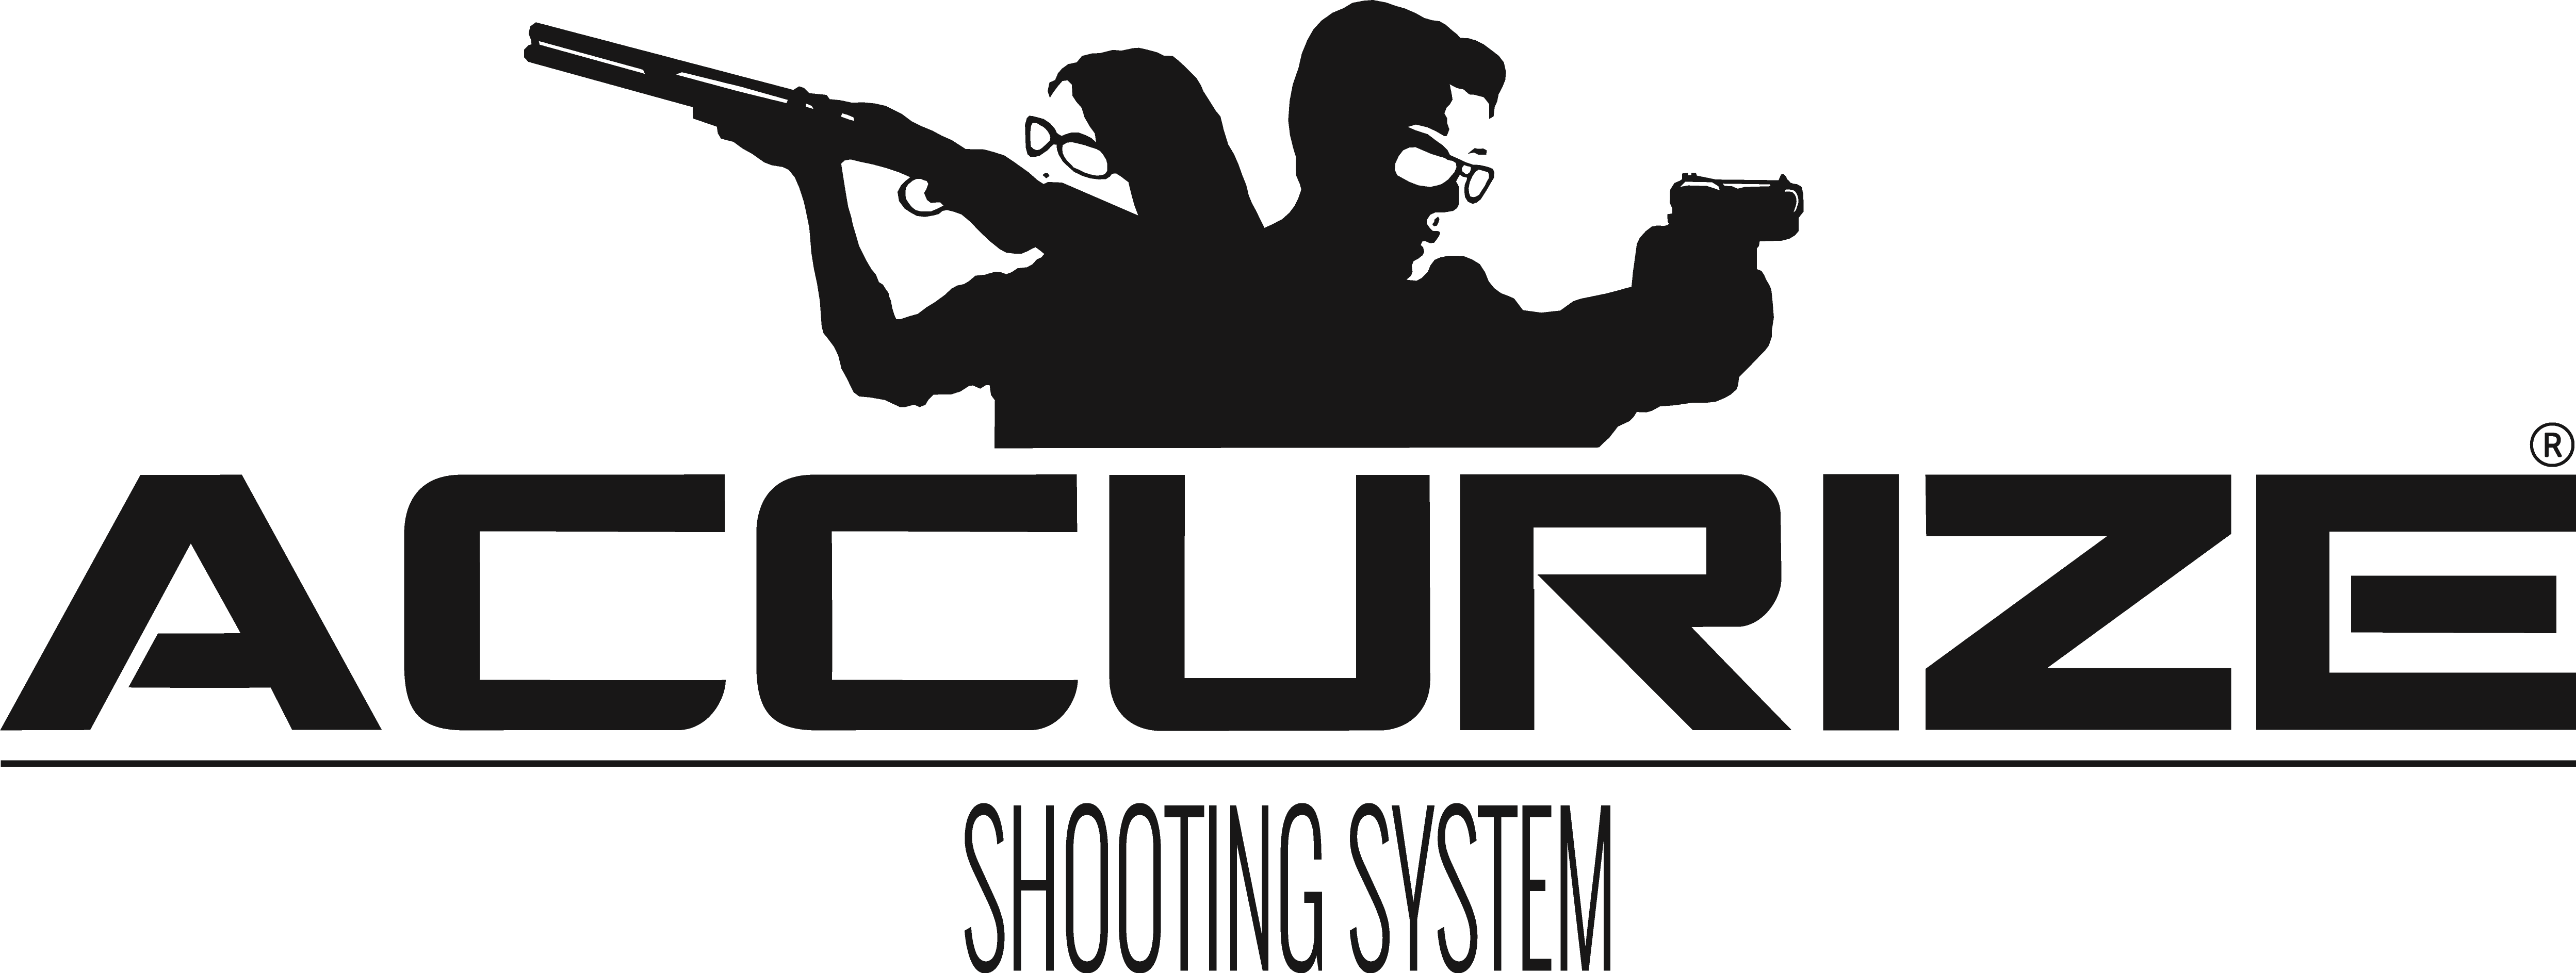 Accurize Shooting Systems